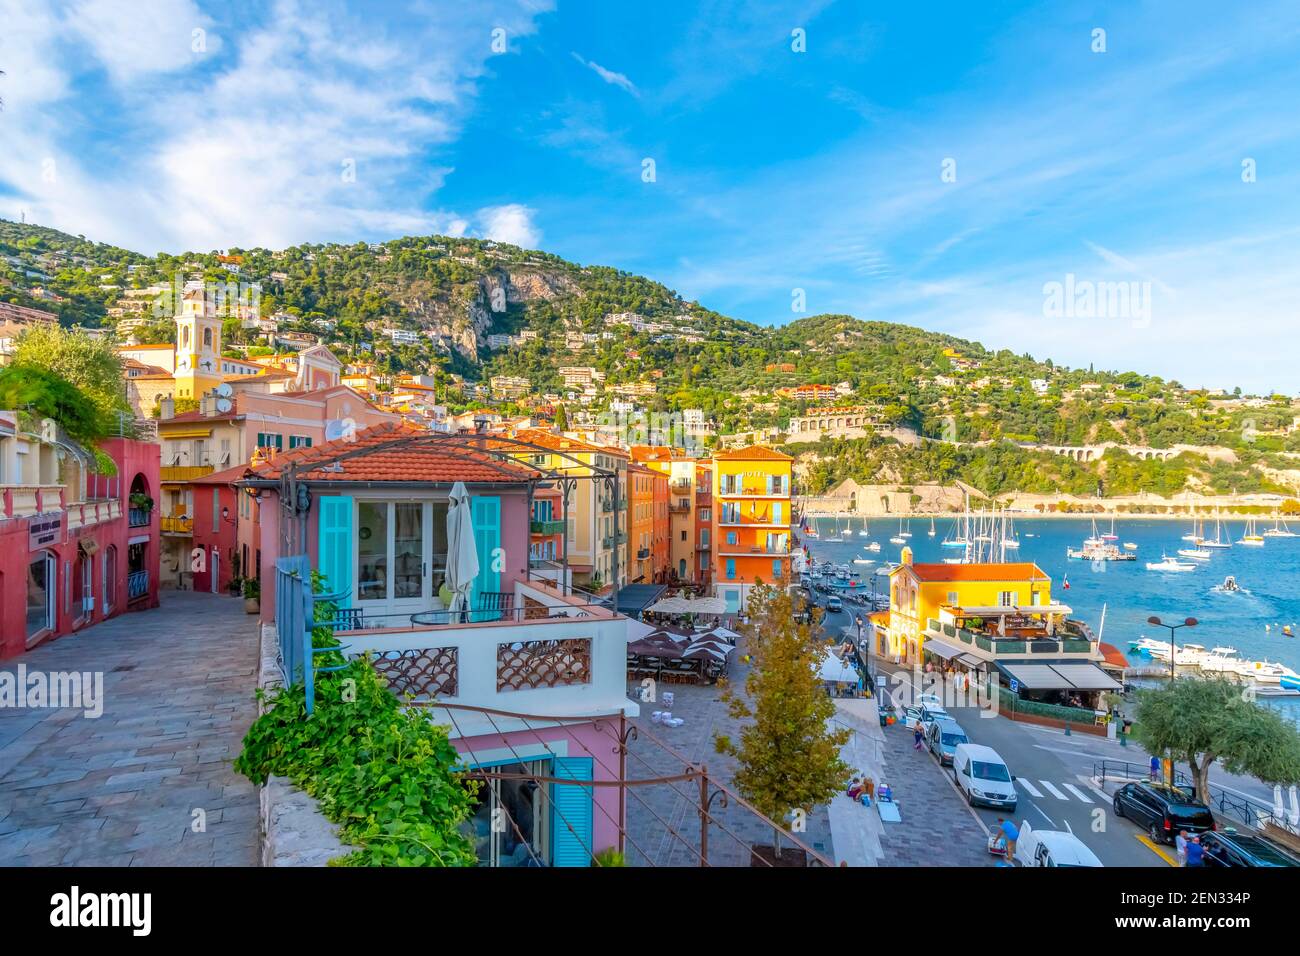 Scenic view of the colorful town, bay and marina of Villefranche Sur Mer, on the French Riviera coast of Southern France. Stock Photo